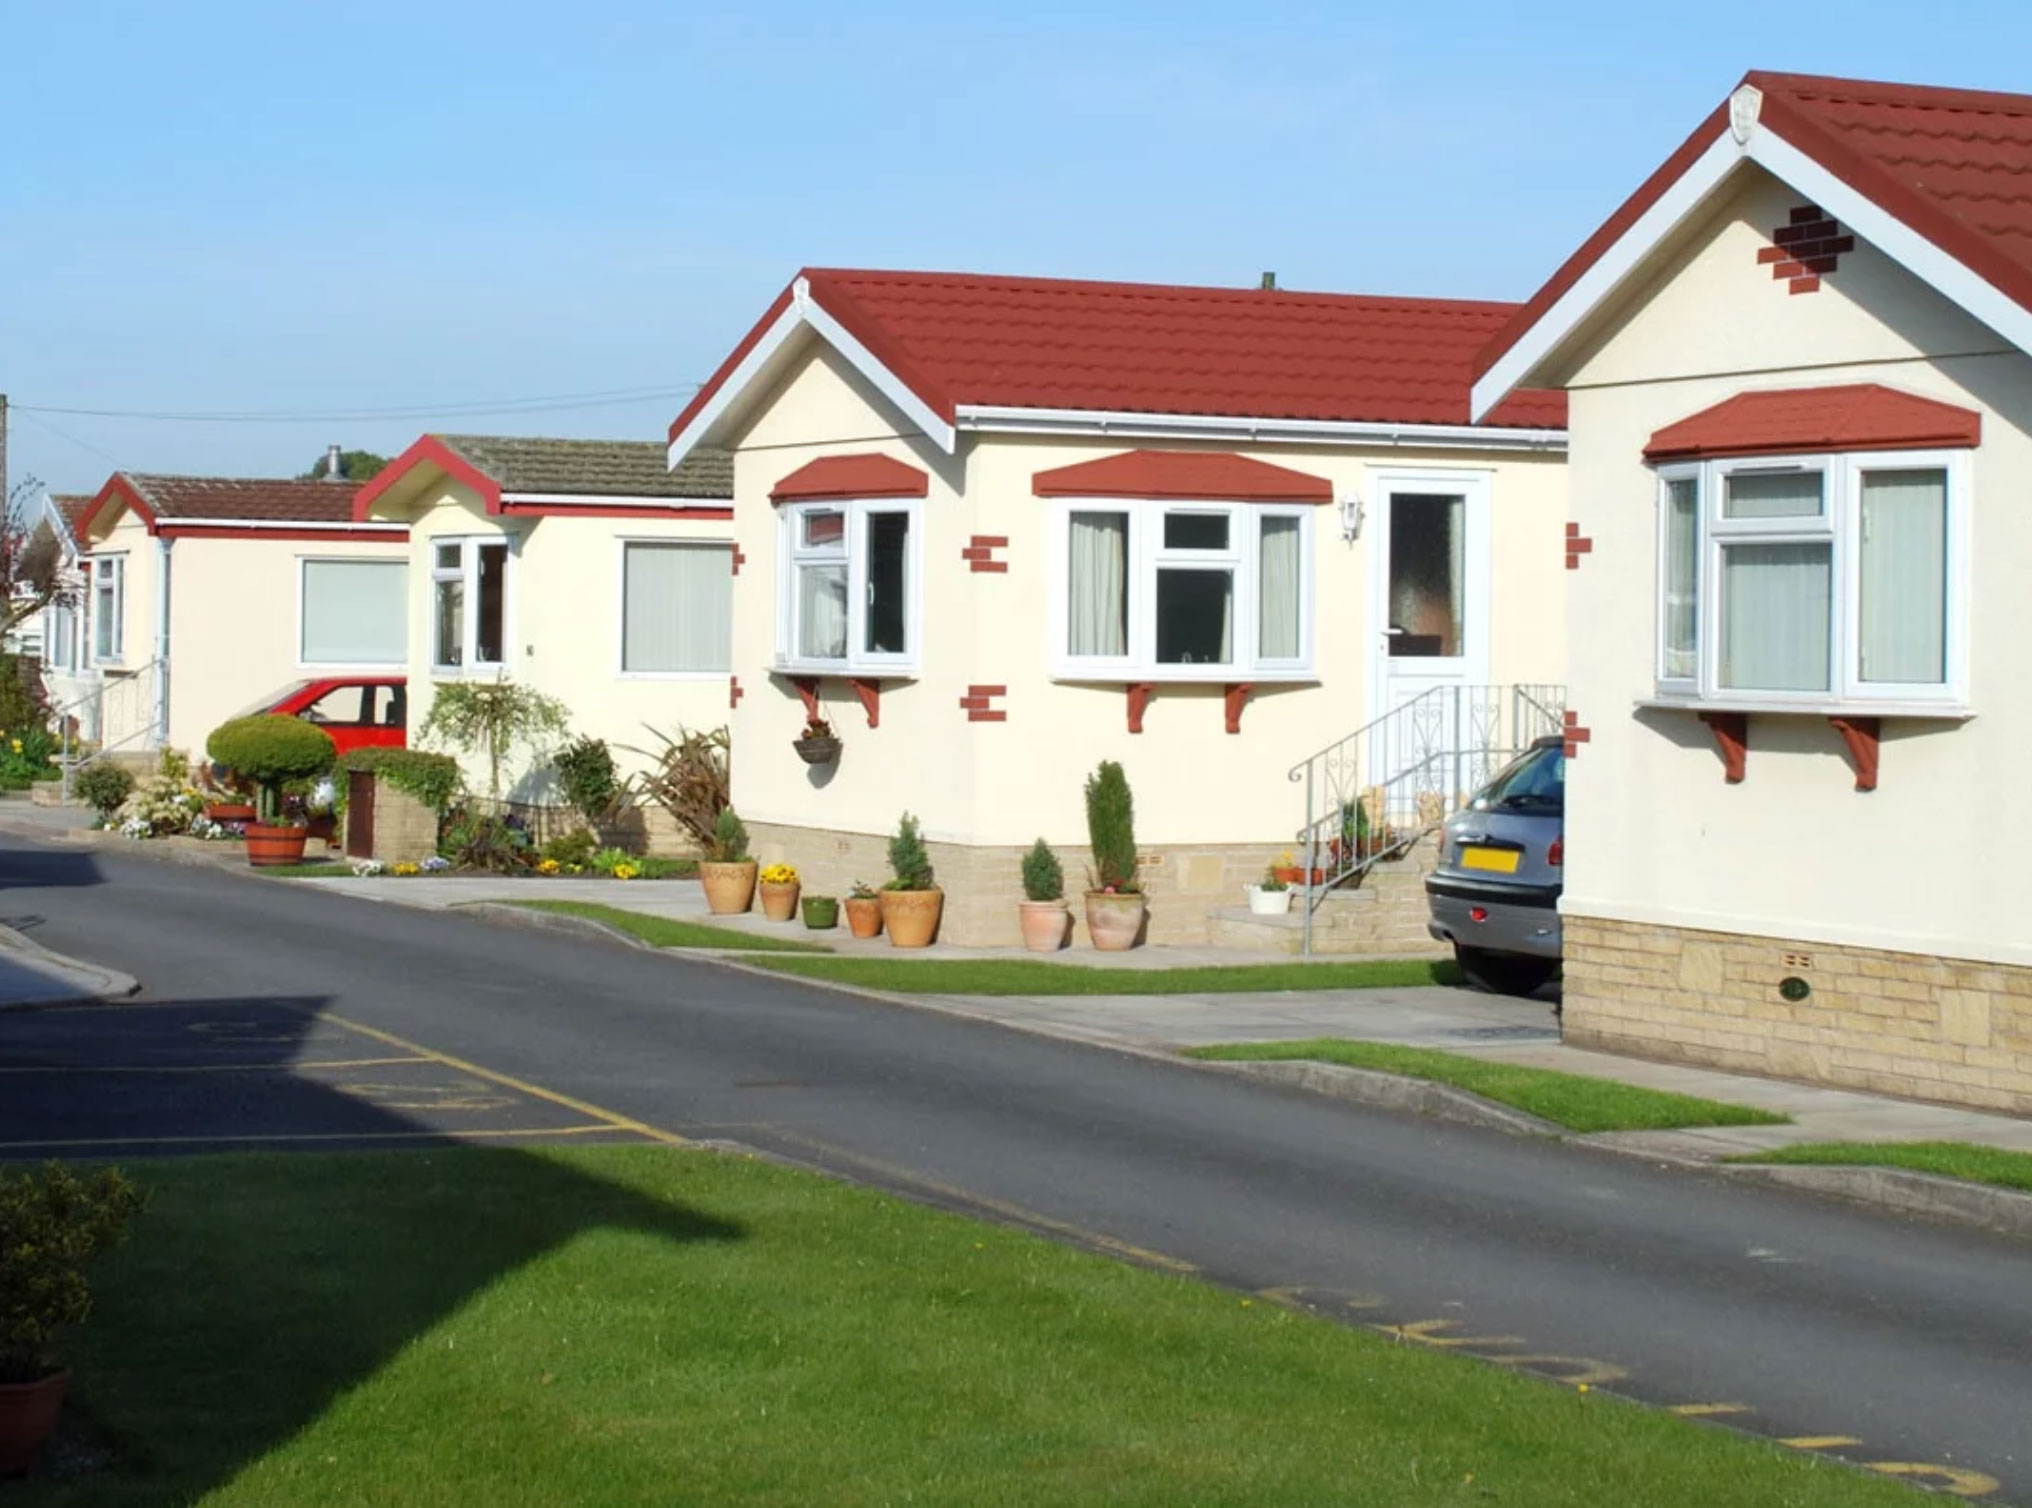 6 Reasons Mobile Home Parks Rock As An Investment